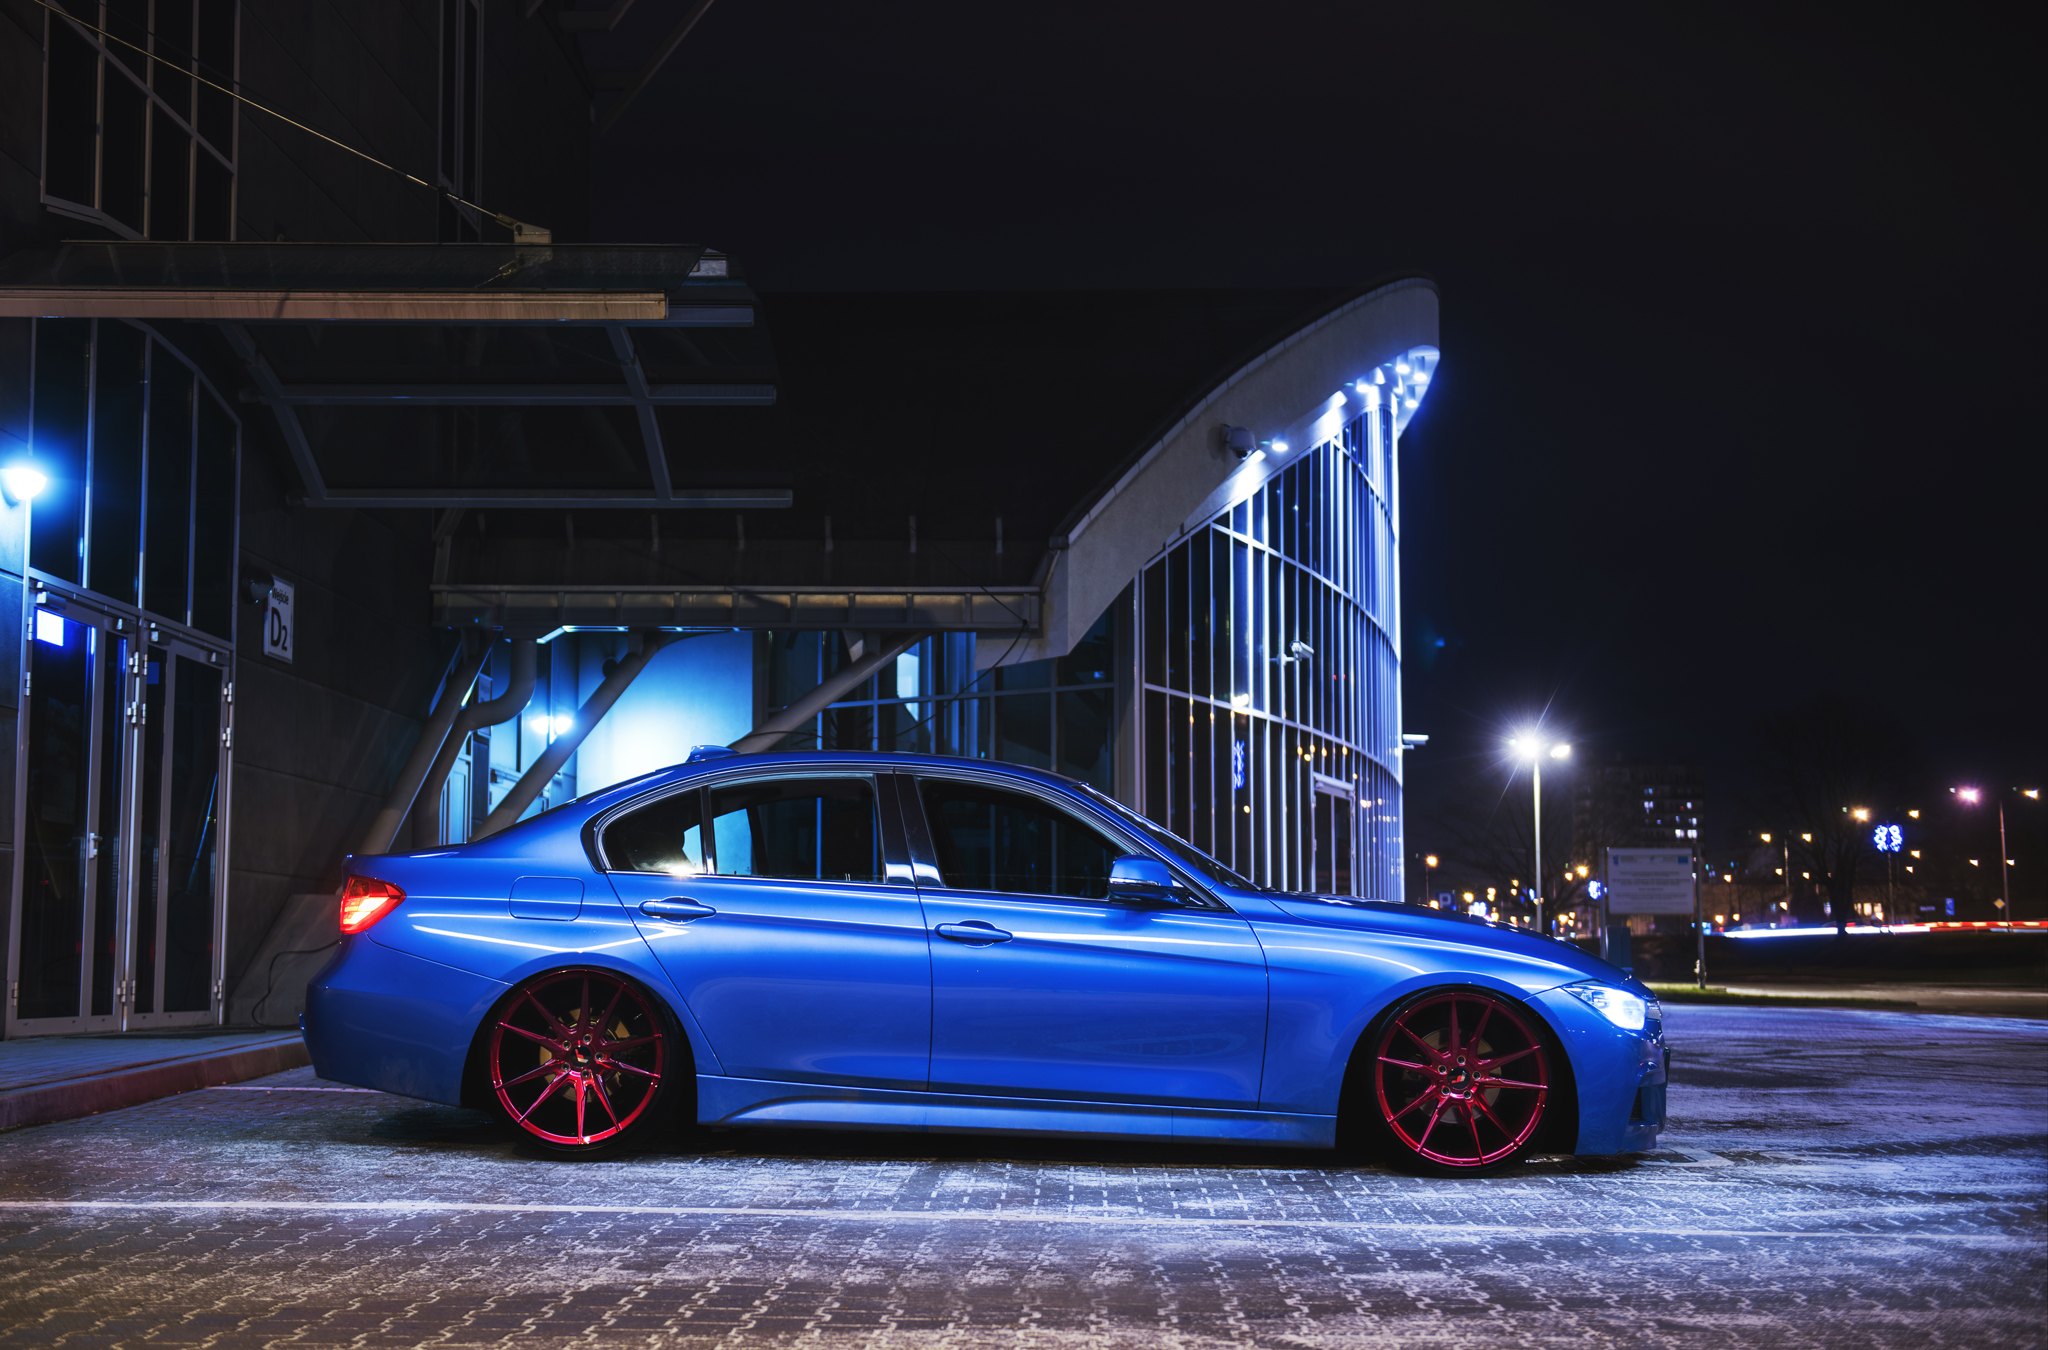 Aftermarket Side Skirts on Blue BMW 3-Series - Photo by JR Wheels